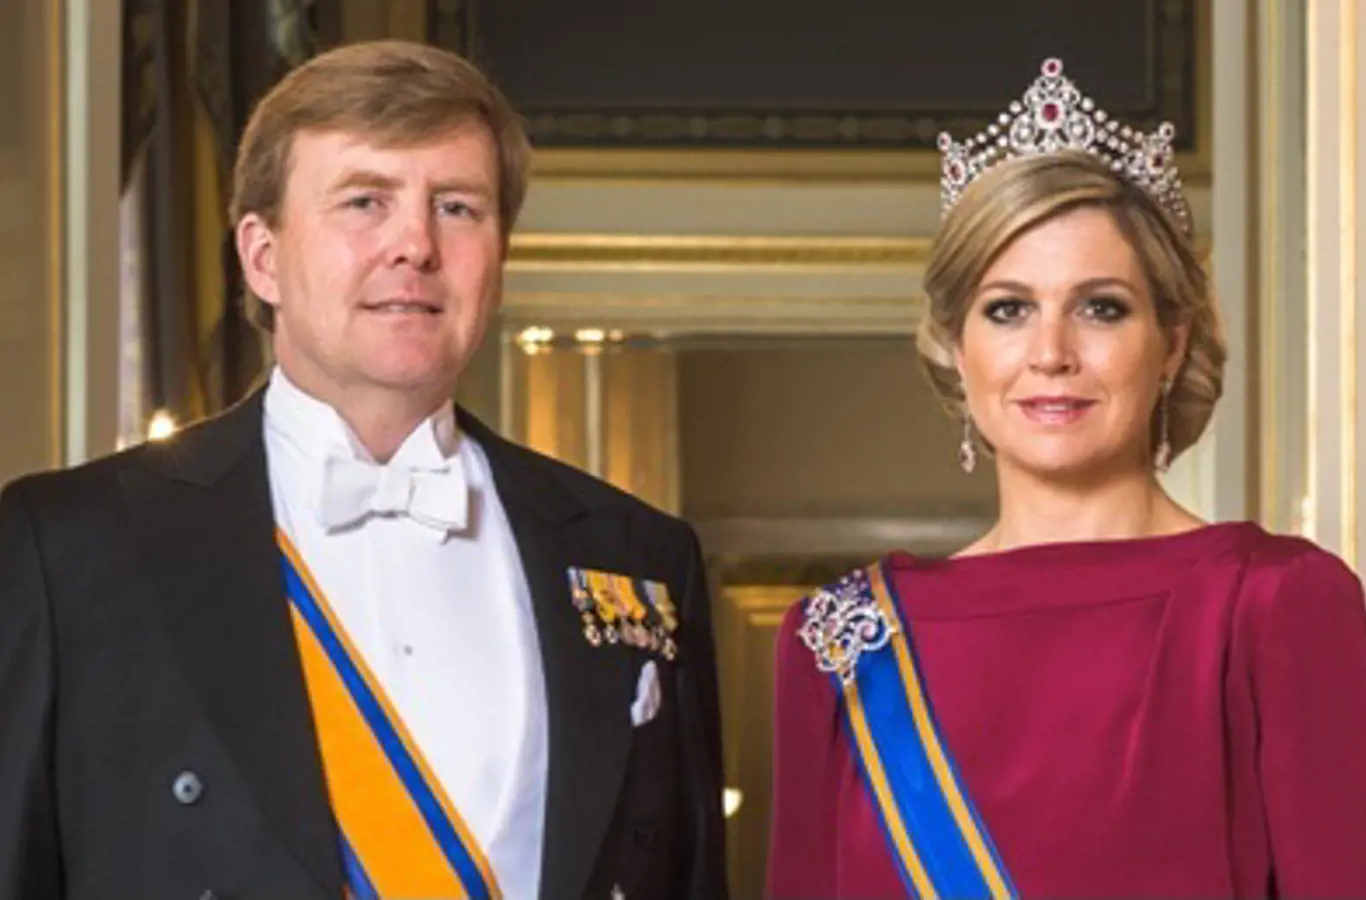 HM King Willem-Alexander and HM Queen Máxima of the Netherlands.